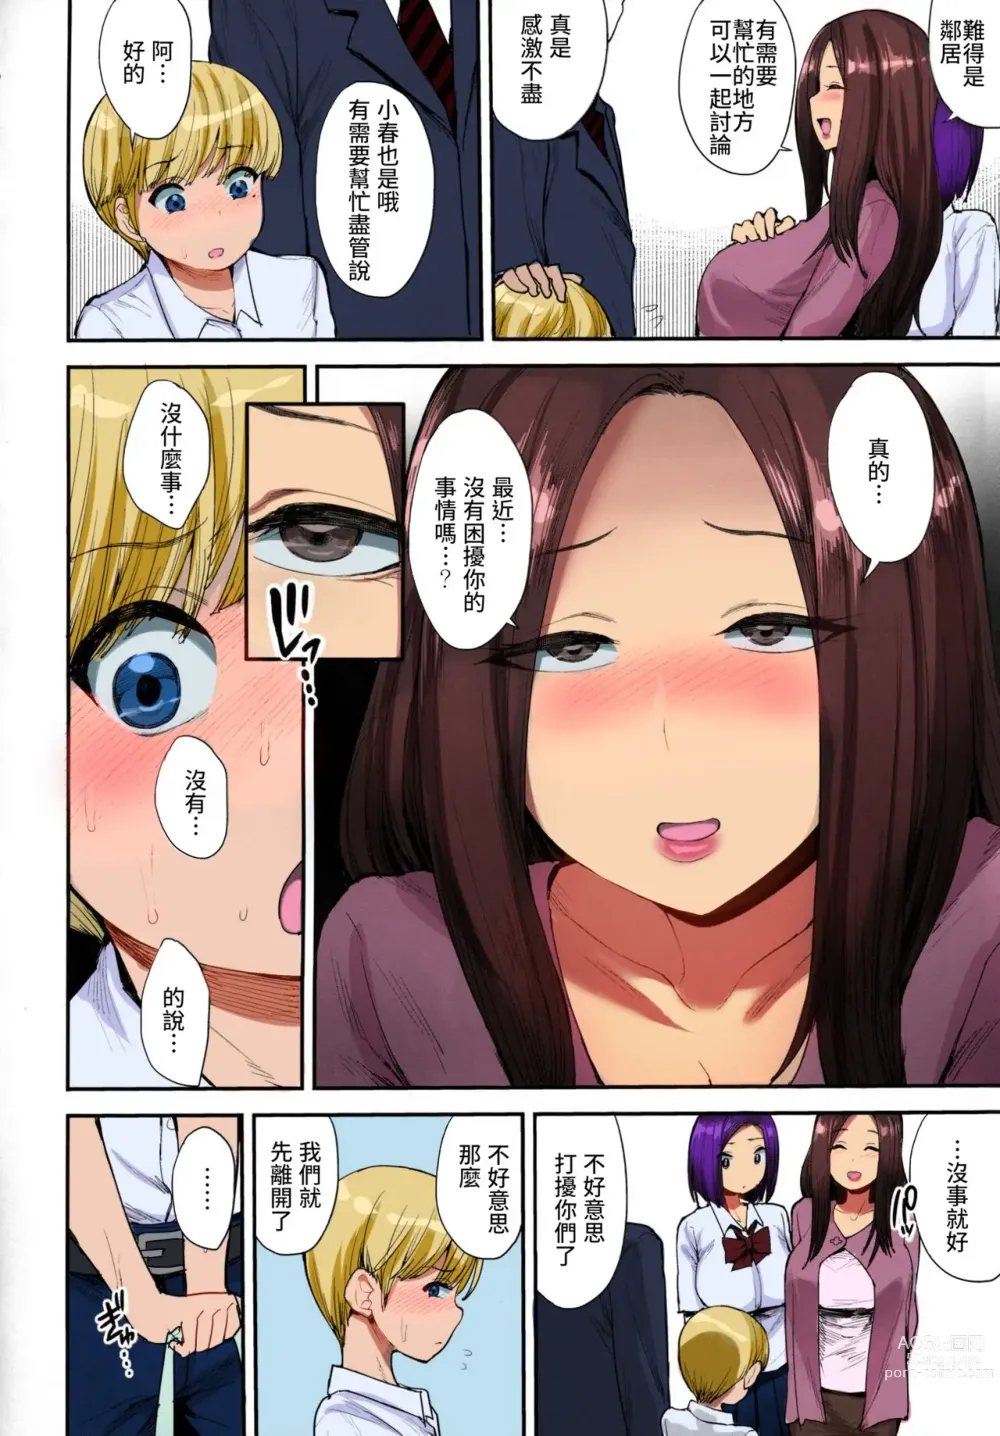 Page 3 of doujinshi 魅魔鄰居 (decensored)